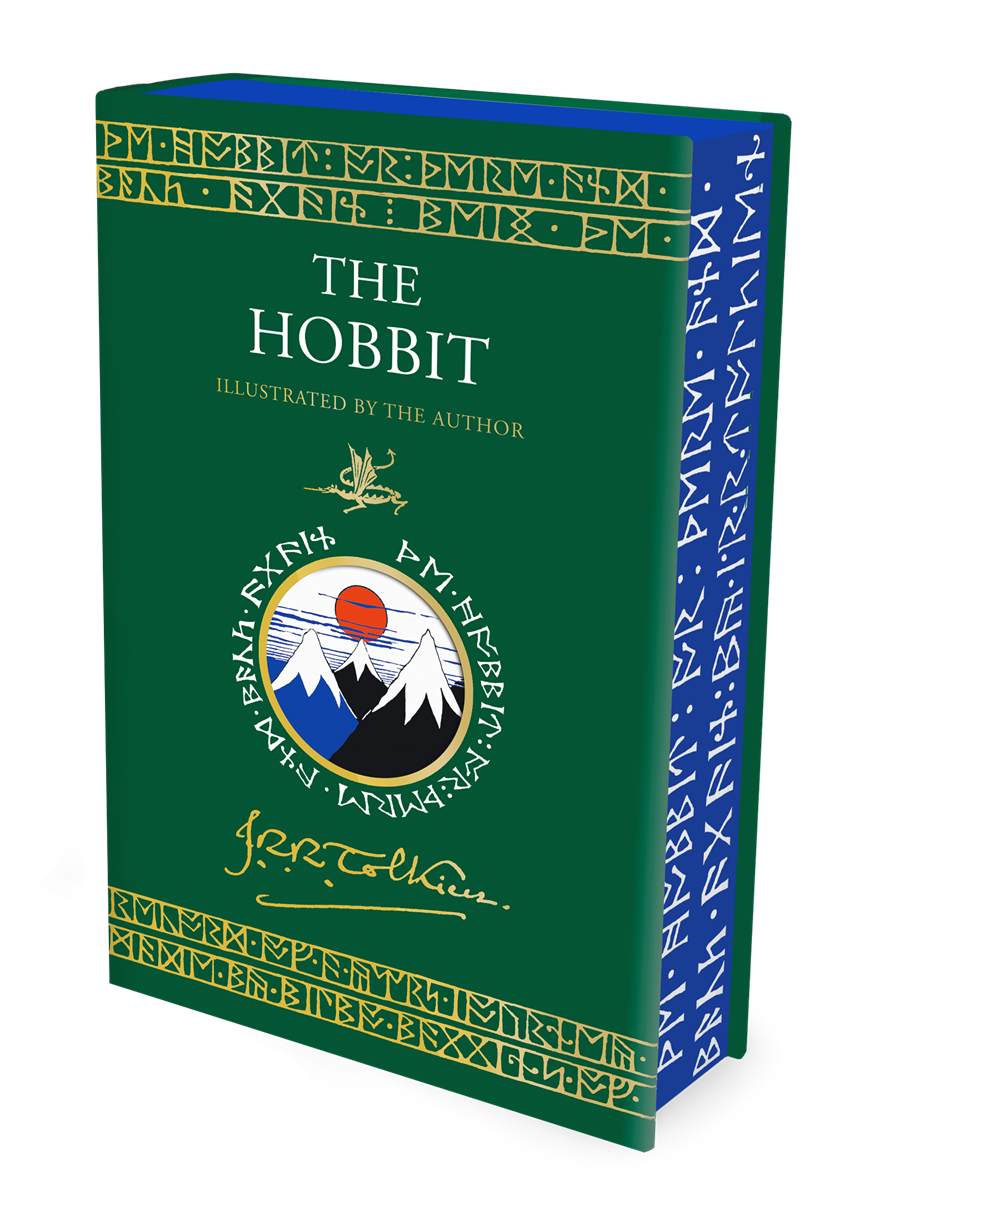 The Hobbit Illustrated by Author - J R R Tolkien